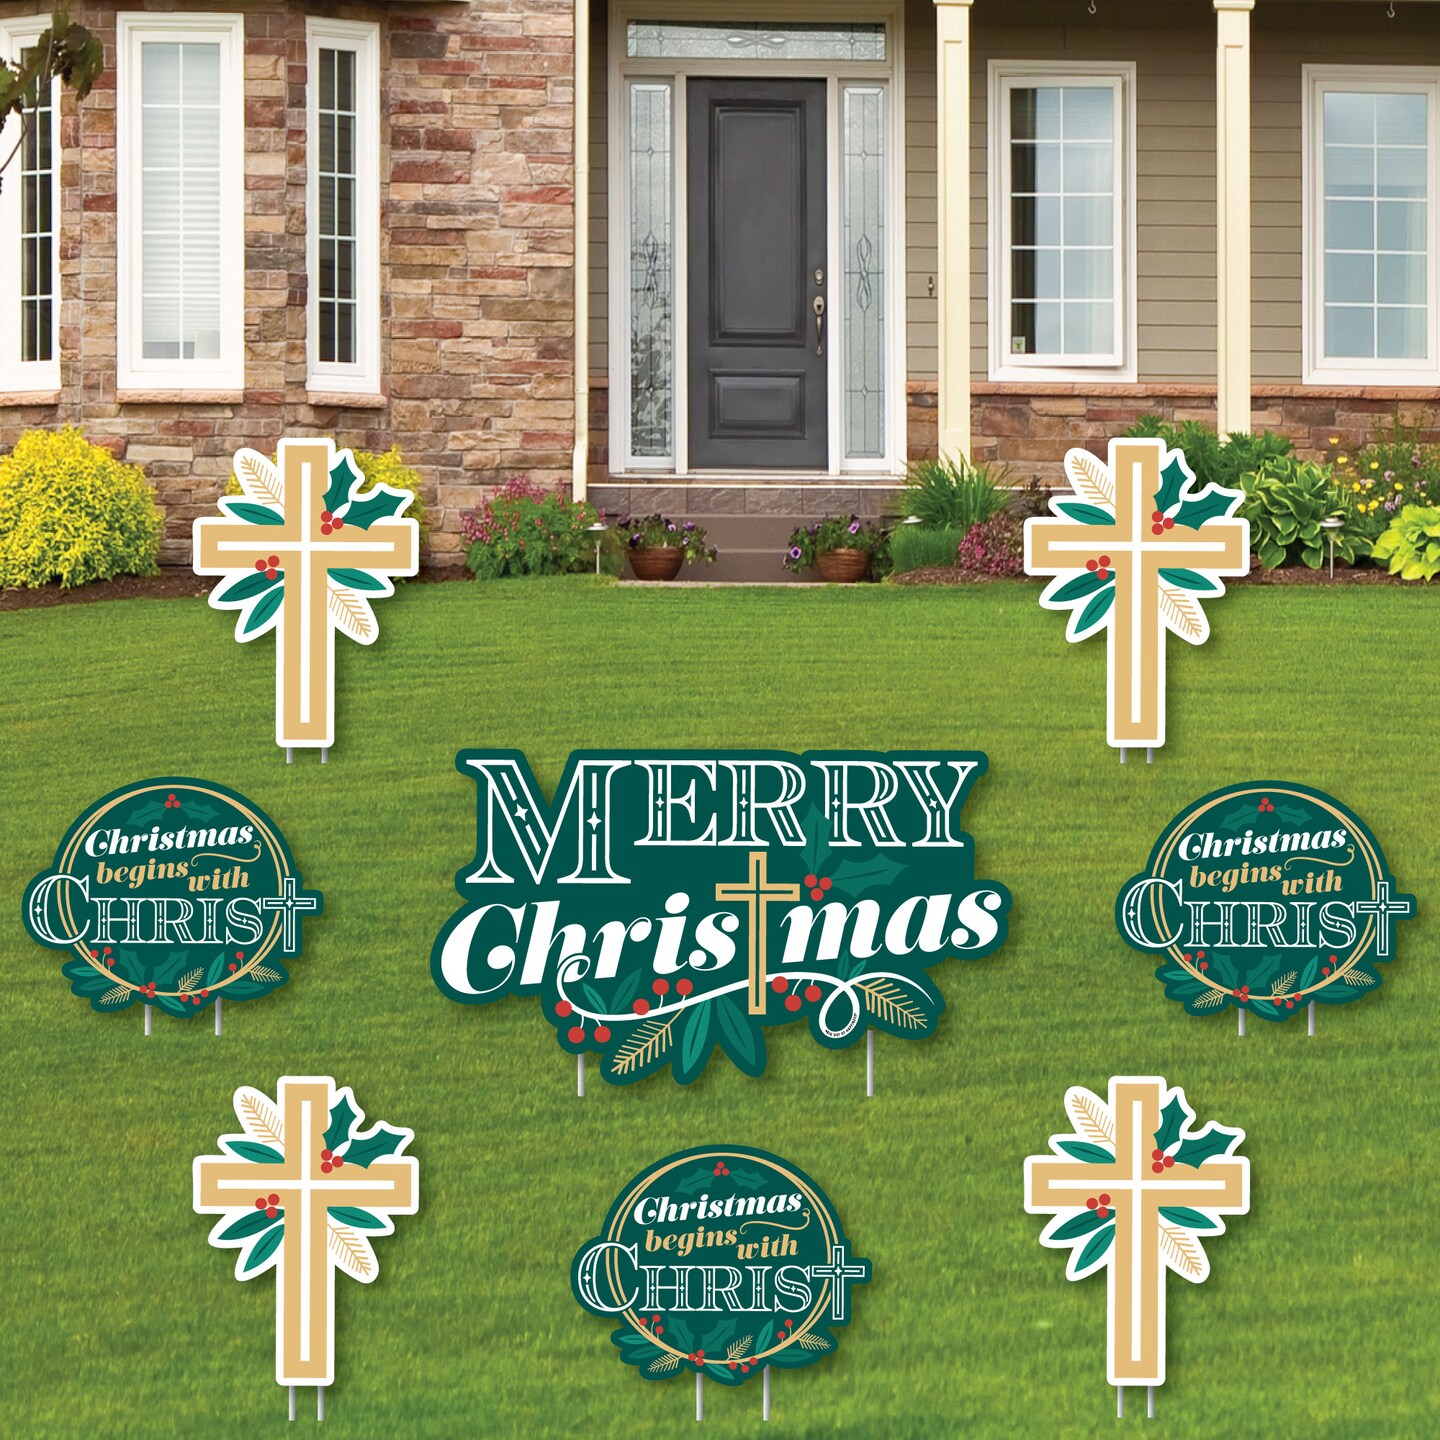 Big Dot of Happiness Religious Christmas - Yard Sign and Outdoor Lawn Decorations - Merry Christmas Cross Yard Signs - Set of 8